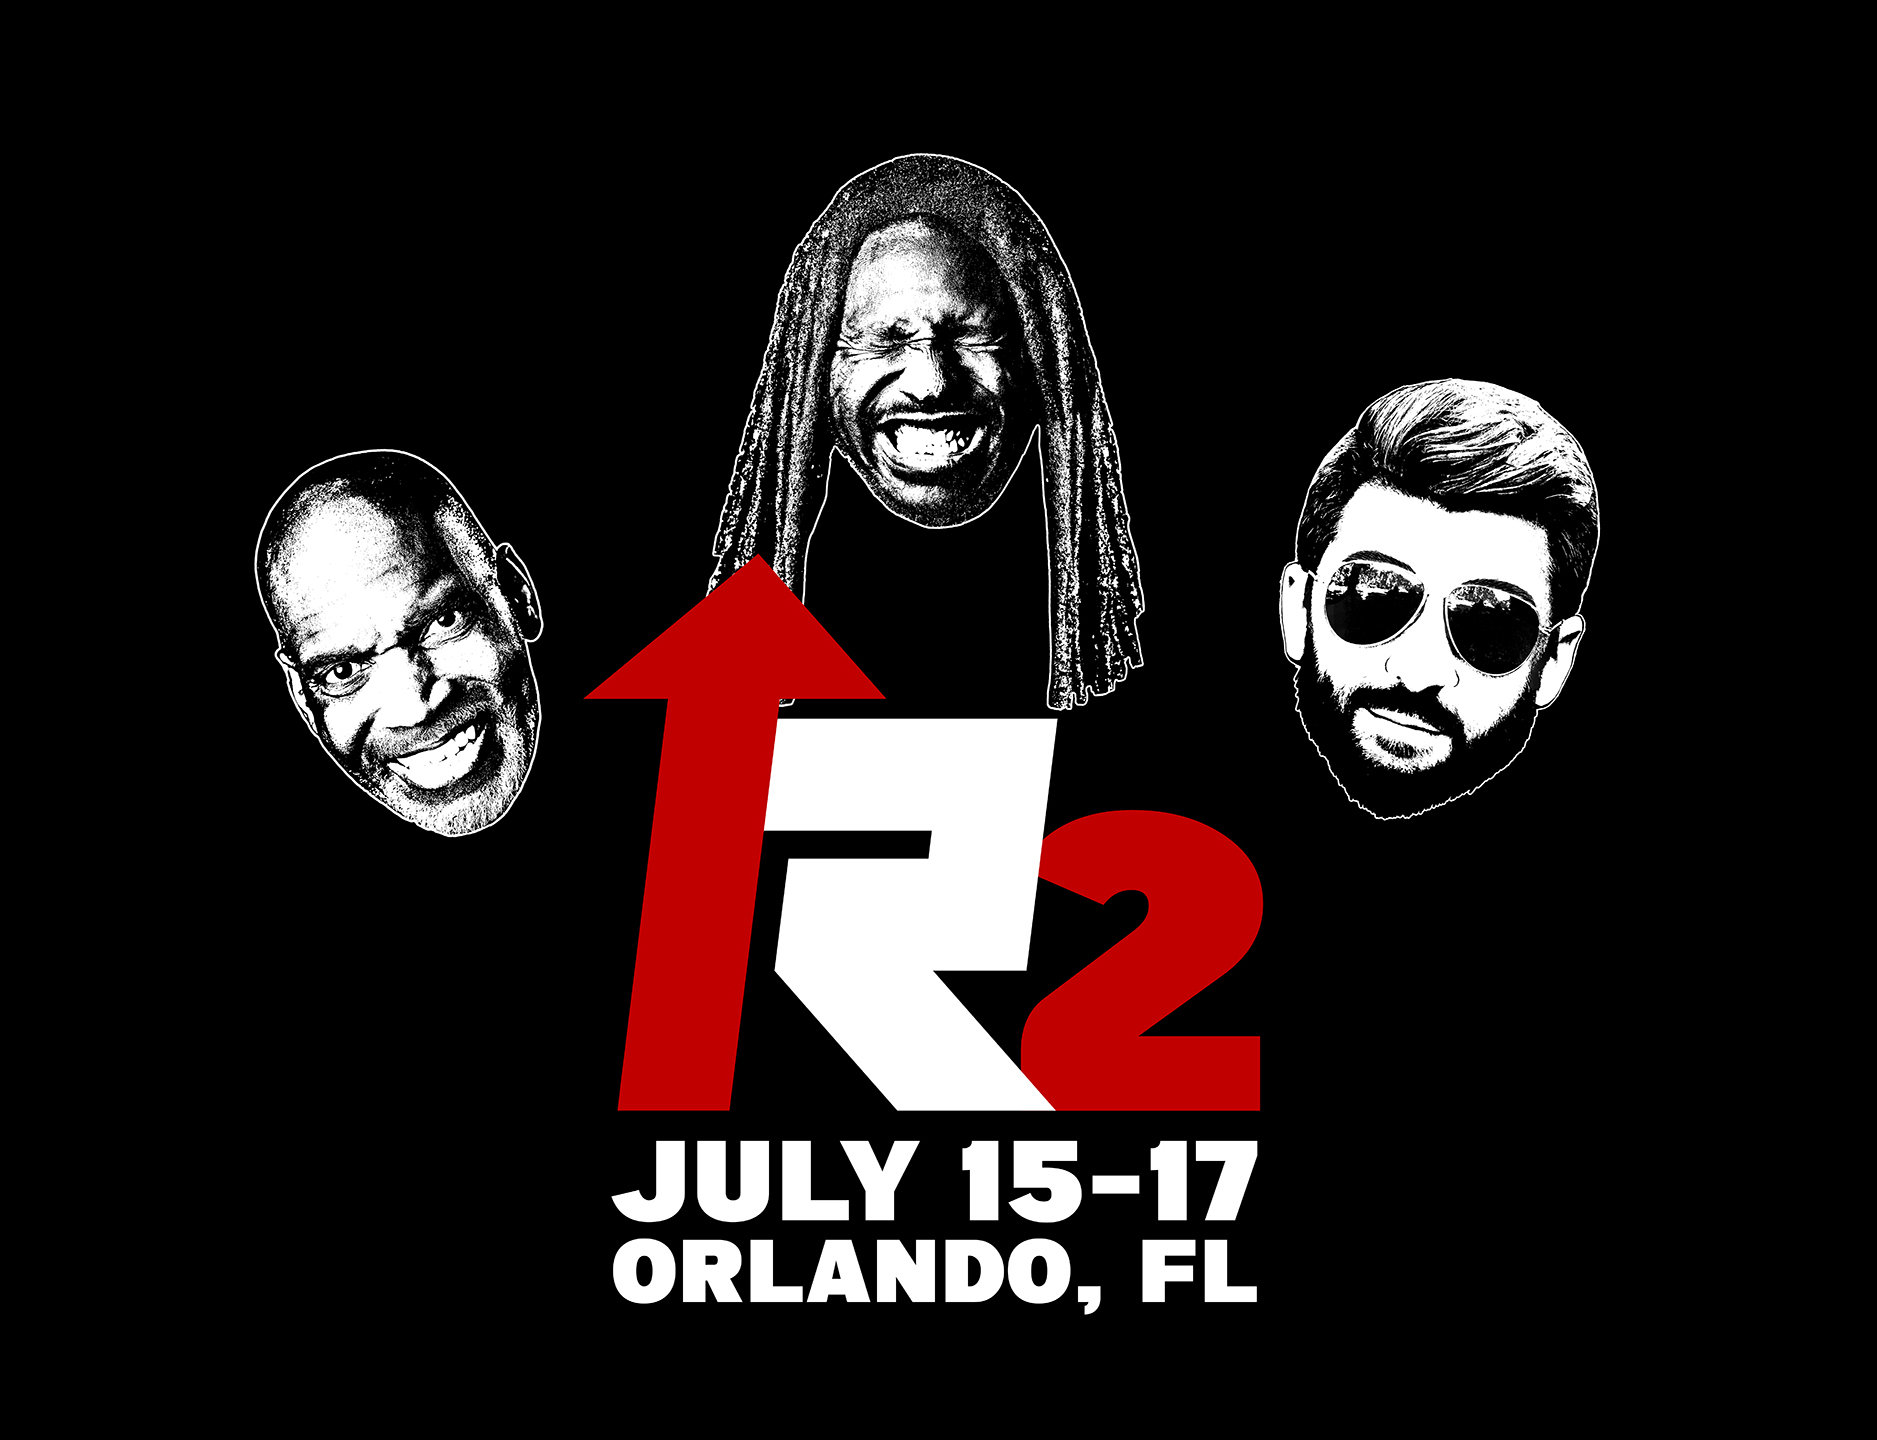 JOIN US FOR RISE2 IN ORLANDO